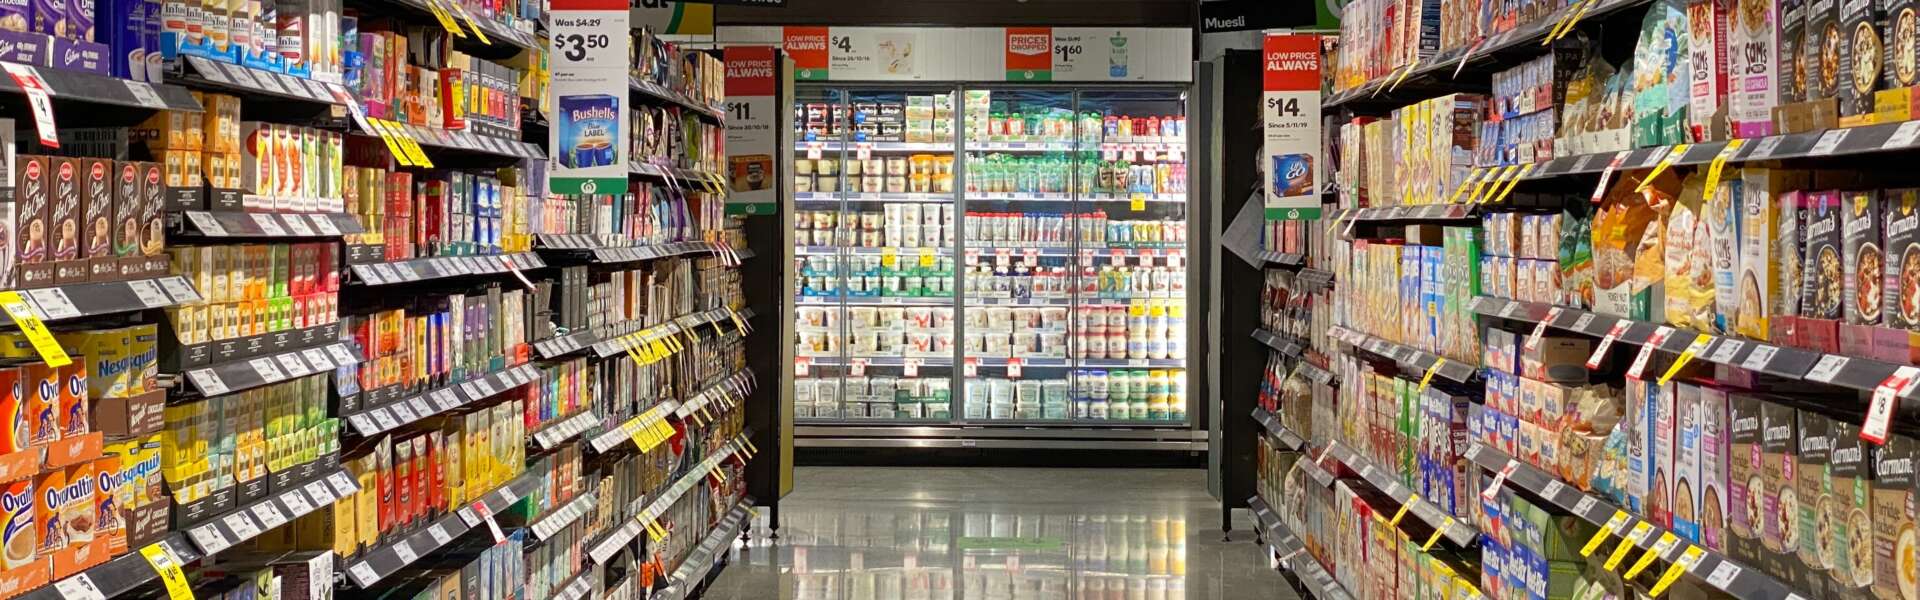 an aisle of a grocery store looking onto the refrigerated section